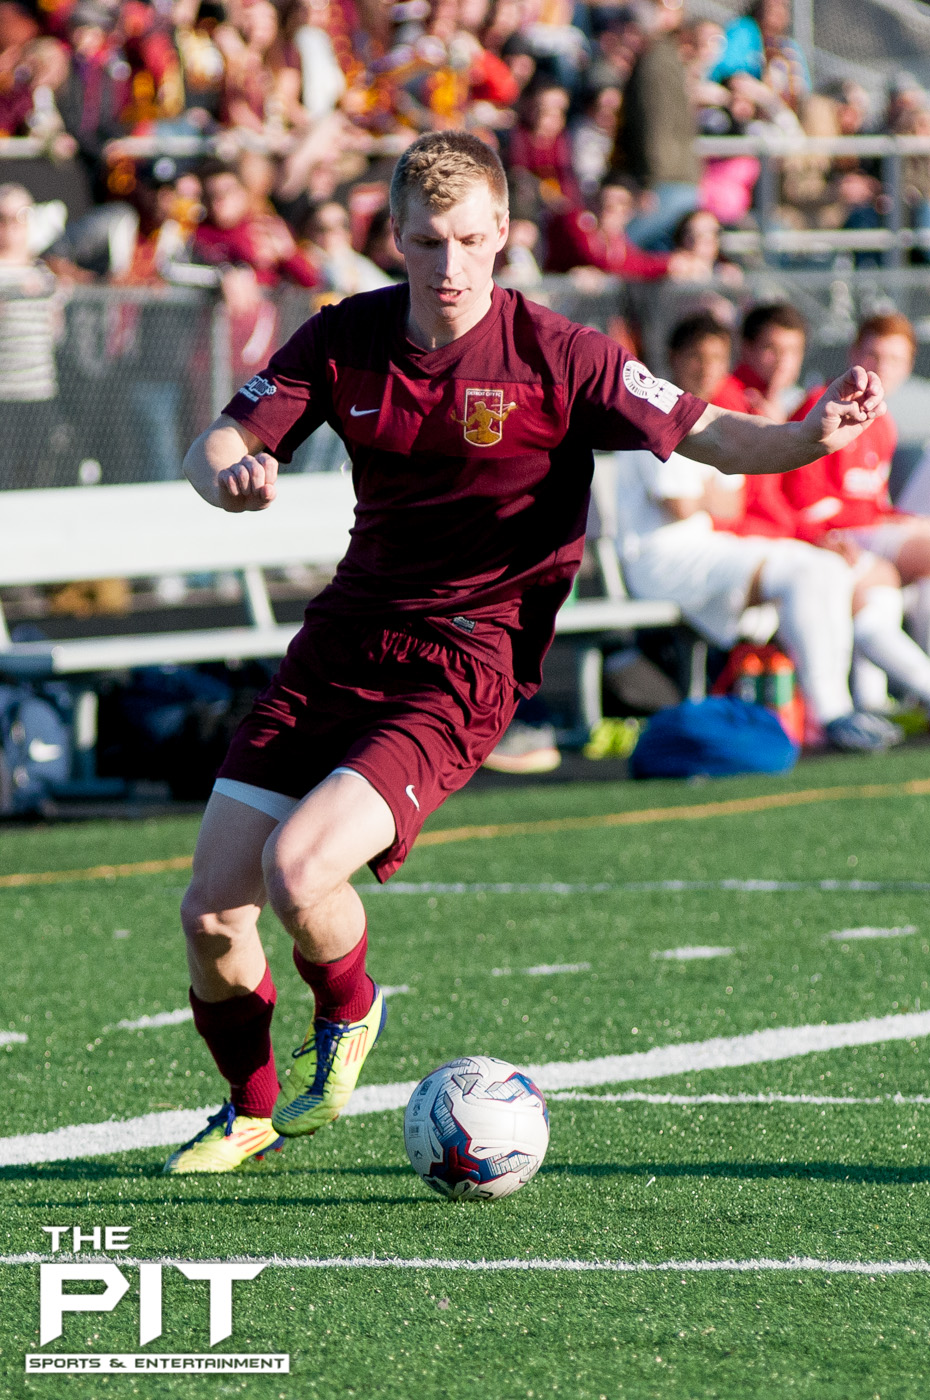 Detroit City FC Forward Zach Meyers (15) pushes the ball up the field for a shot attempt at a scrimmage match against Saginaw Valley on April 19, 2014 at Hurley Field. Brian Quintos / The Pit: SE